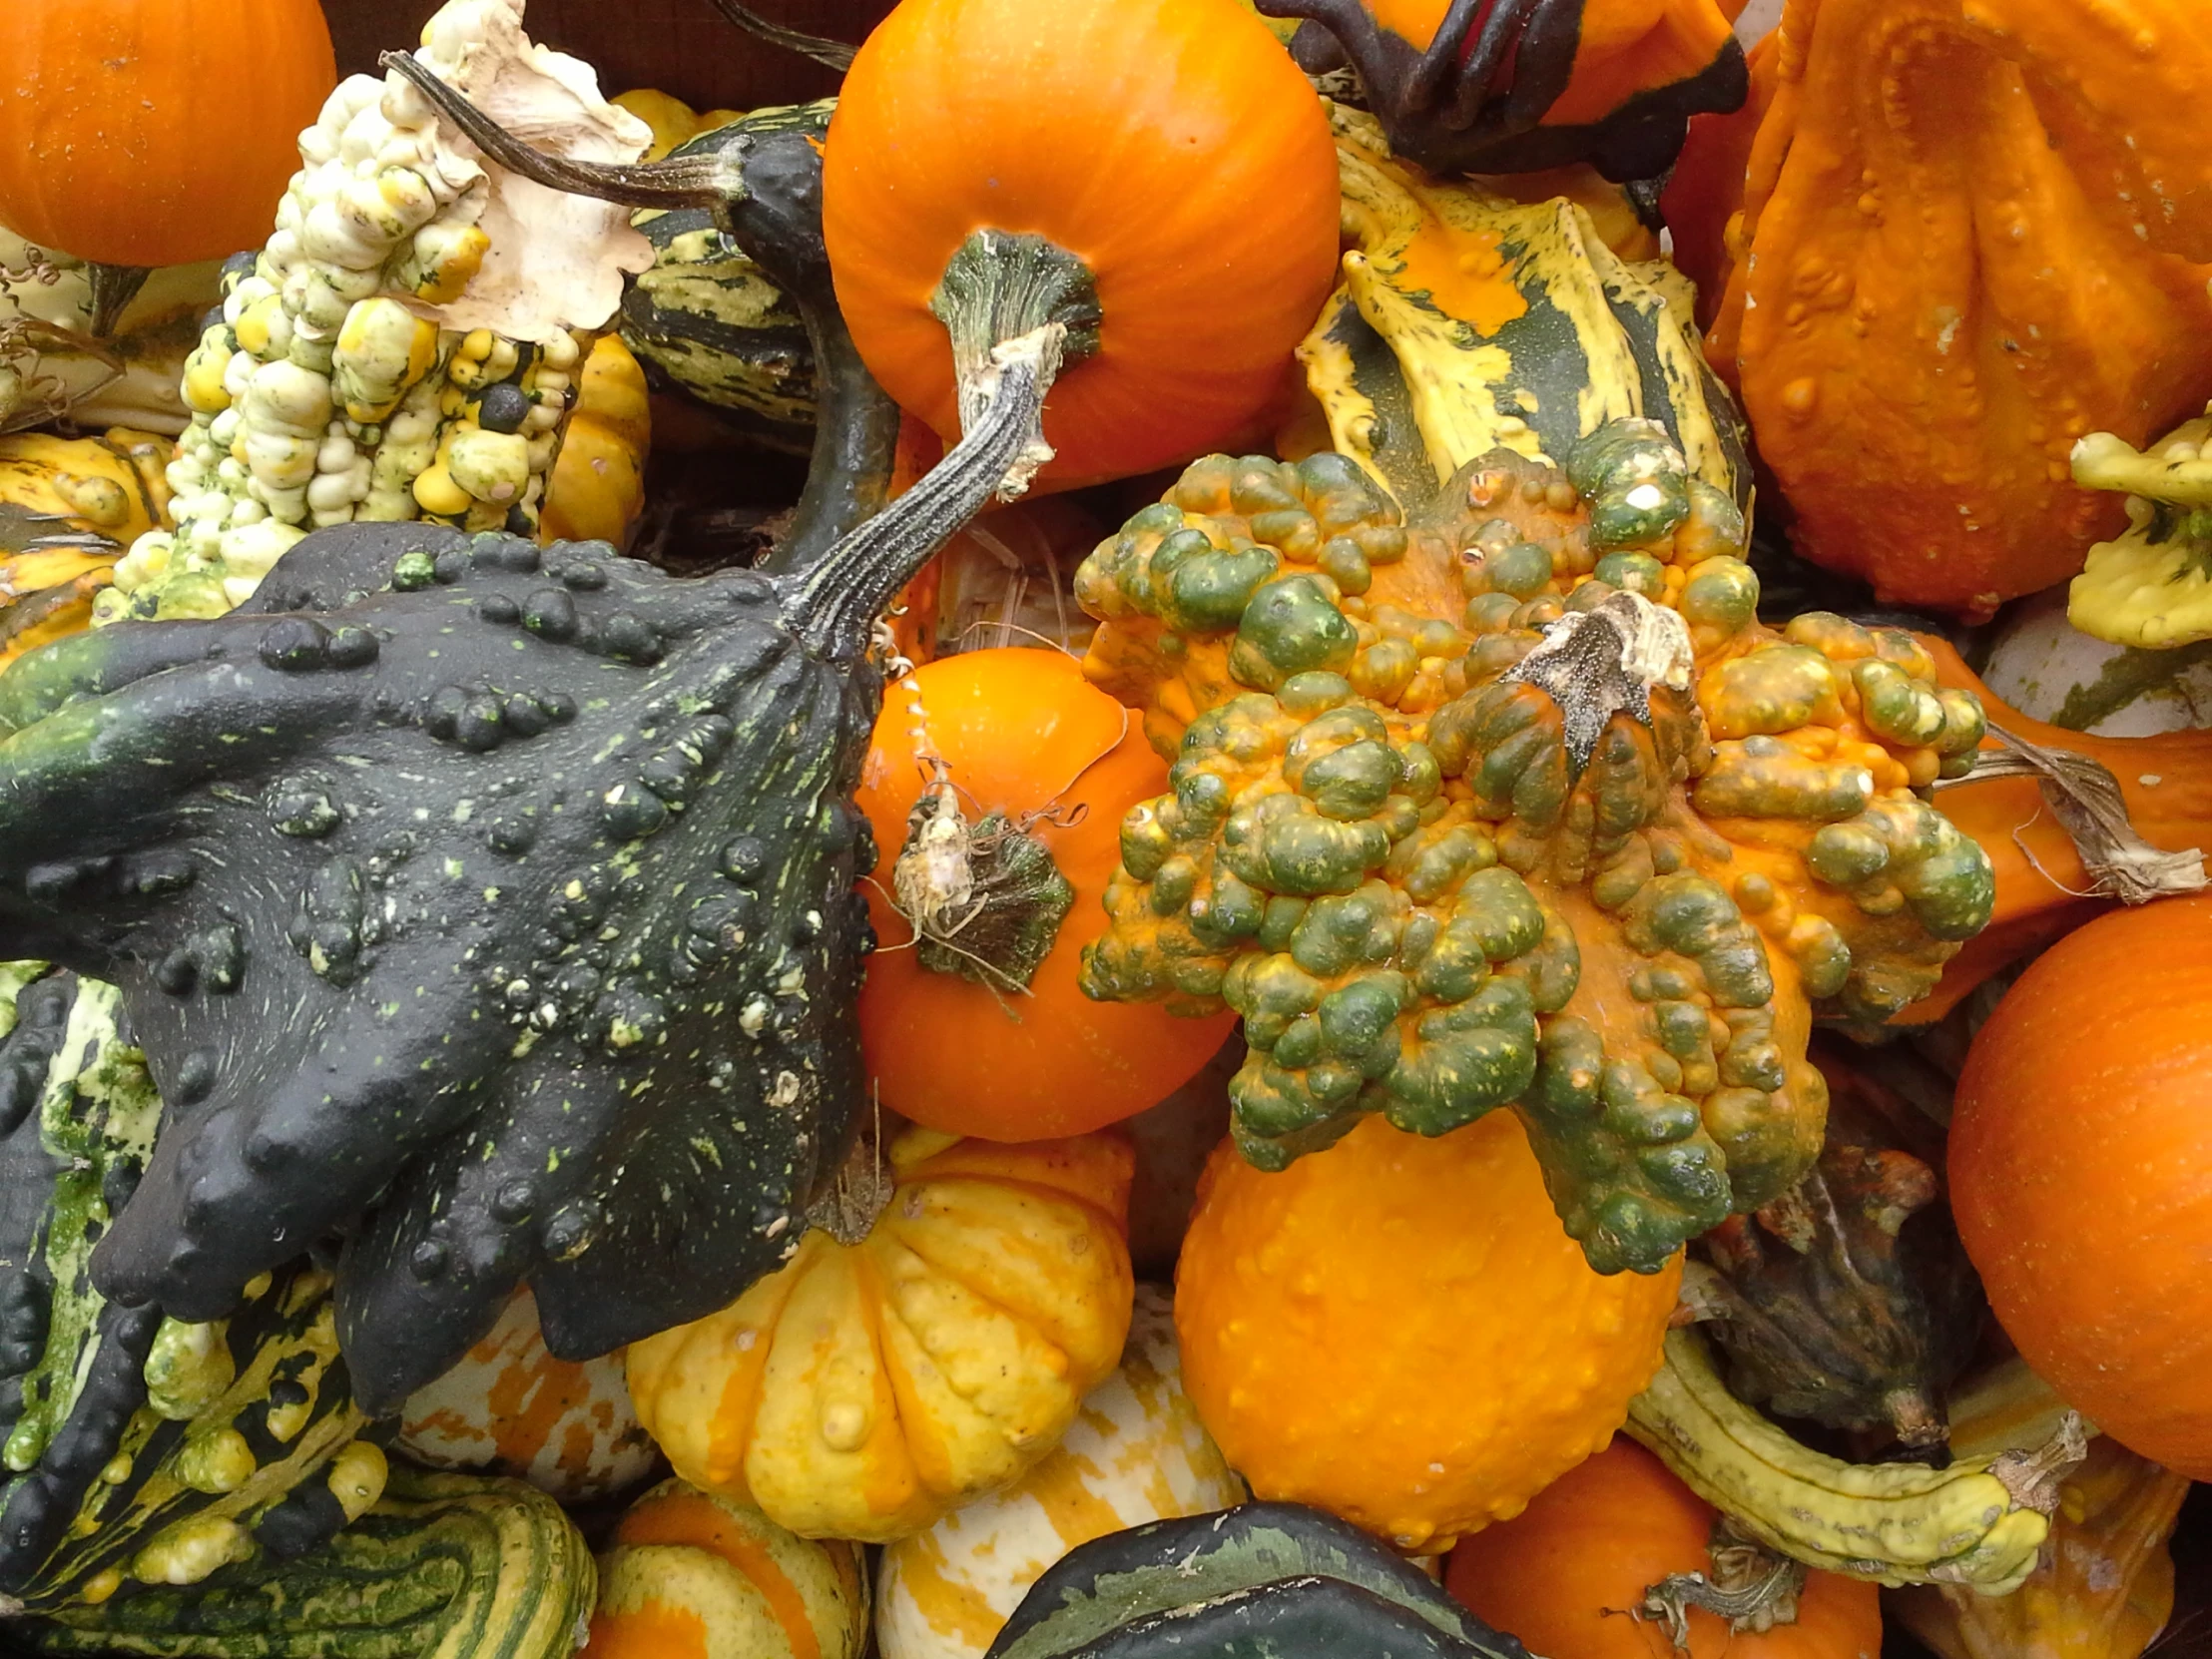 several types of pumpkins, gourds and squash